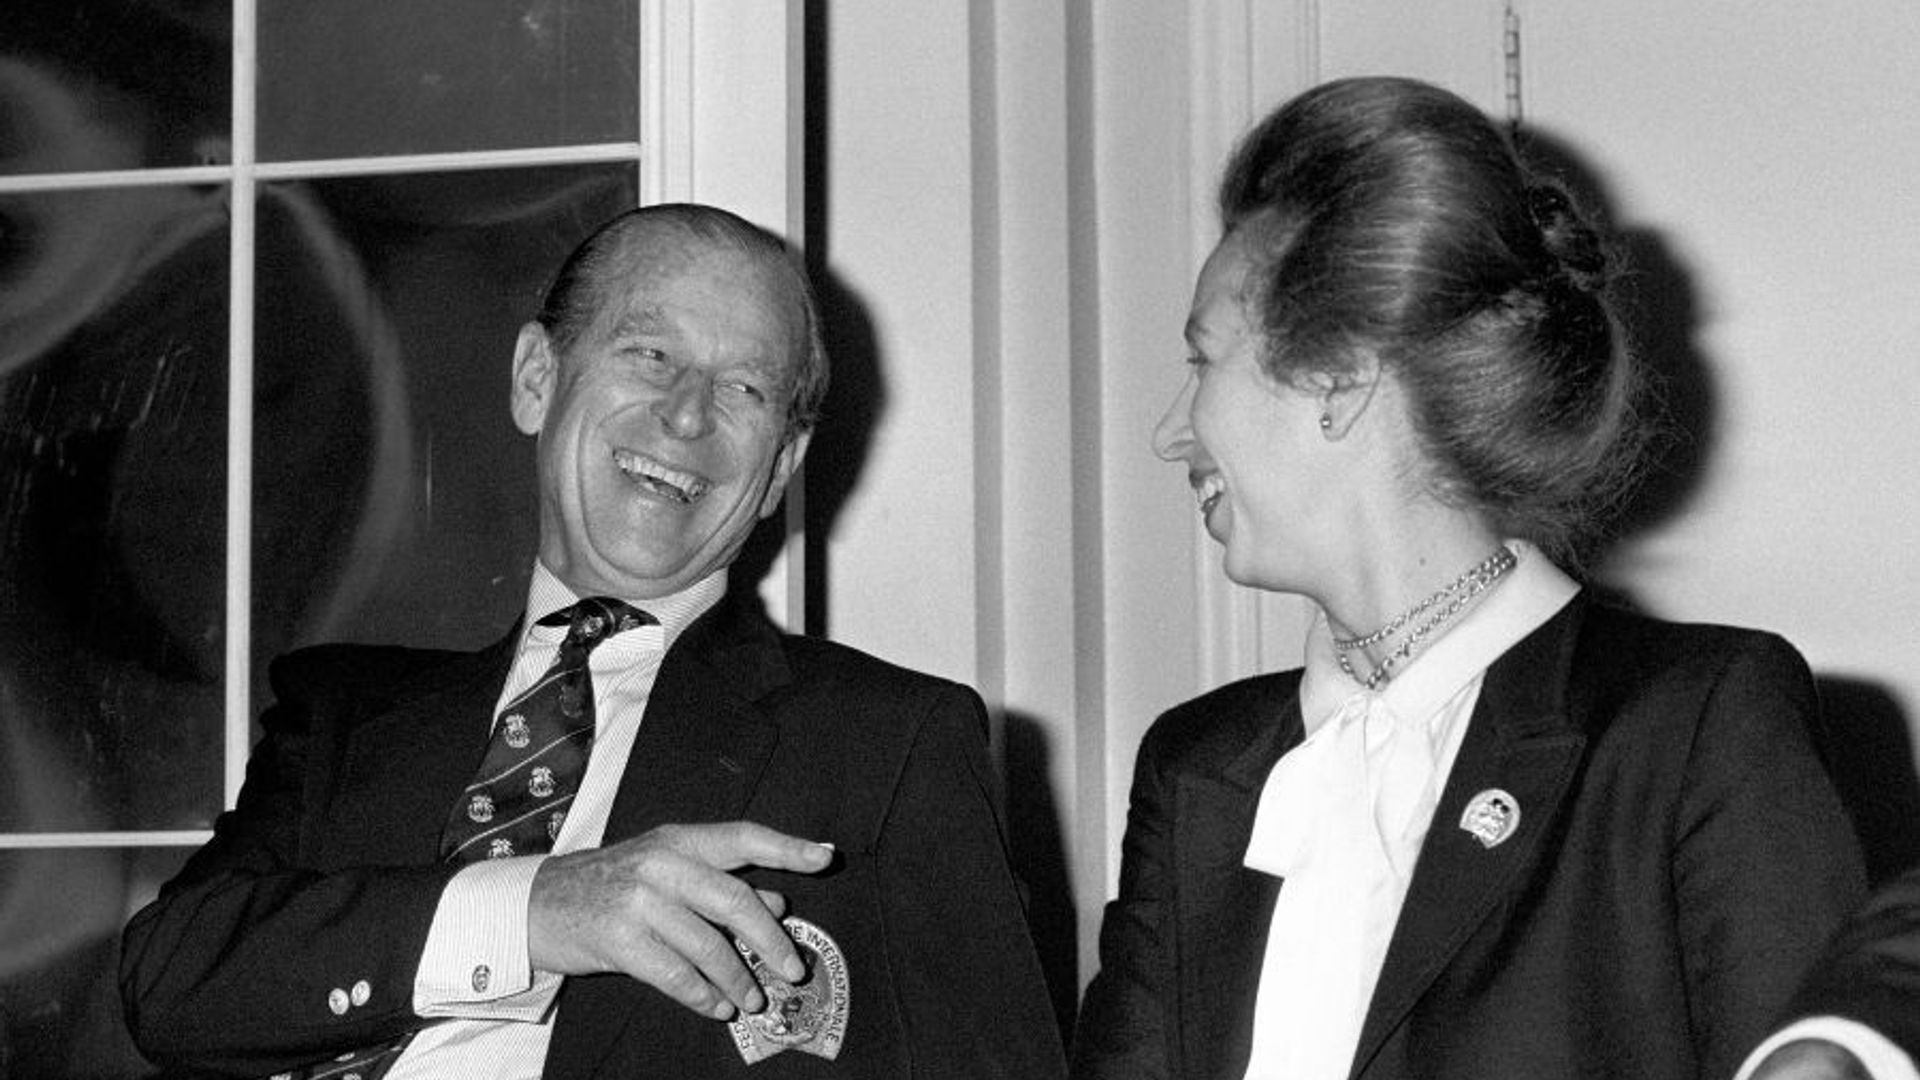 Princess Anne pays tribute to Prince Philip and thanks fans for support after his death